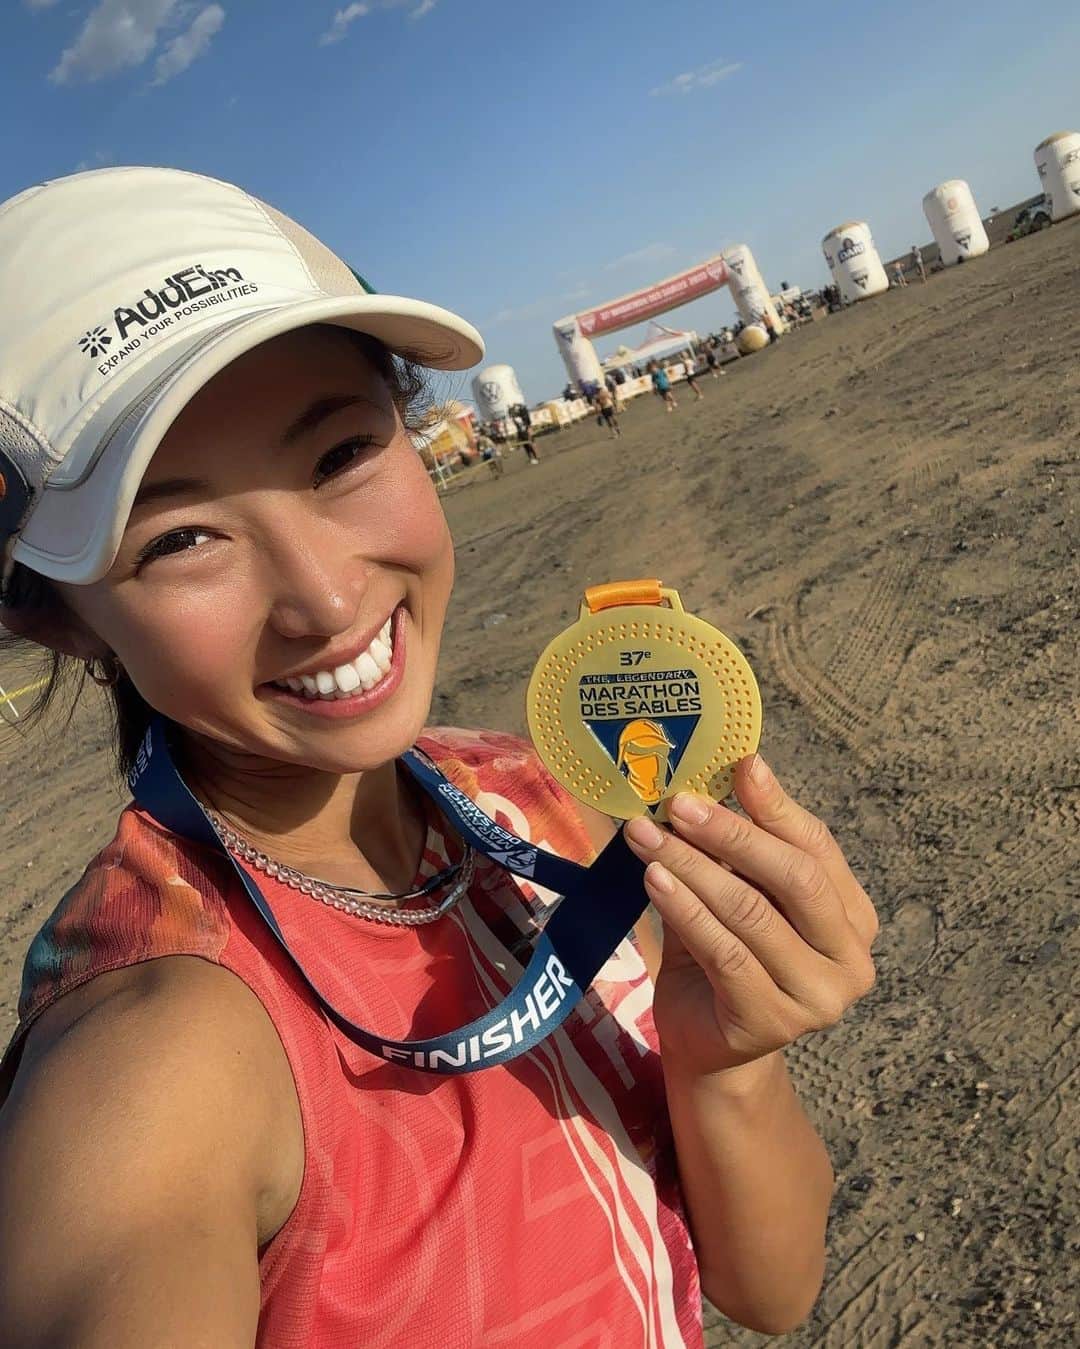 TOMOMIさんのインスタグラム写真 - (TOMOMIInstagram)「Marathon Des Sables🏜 Women 3rd🥉(Over all 19th🏅) ⌚️29:39:51  Thank you very much for your support😭🙏✨  I was definitely stronger than last time.  I couldn't win,  but I'll get stronger and get revenge.  I would be happy if you could continue to support me🙇‍♀️  Thank you so much ✨ I love everyone🥹🫶🏾❤  ┈┈┈┈┈┈┈┈┈┈┈┈┈┈┈┈┈┈┈┈ 取り急ぎ🙇‍♀️ 本当にたくさんの応援ありがとうございました！  たくさん応援パワーや温かいメッセージのおかげで 前回よりも確実に強くなれました。  優勝という位置にはまだまだ届かなかったけど もっと強くなって必ずリベンジします。  今後は海外のステージレースを中心に 走力、持久力、忍耐力を強化します！  そして必ずMDSで優勝して世界一になります。  引き続き応援してもらえたら嬉しいです。  本当にたくさんの応援心の底からありがとうございました😭✨  みんな大好きです🥹🫶🏾❤️  Special support🤝 @spot_llc  @narurebo  @orehasesshusu  @phiten_official   #athlete #running #marathon #trail #trailrunning #mountain #japan #runner  #尾藤朋美 #世界のBITOH #日本代表 #アスリート #ランナー #トレイルランナー #マラソン #トレイルランニング  #世の中で最も過酷なマラソン  #サハラ砂漠250kmマラソン  🏜@marathondessables with @use.repost ・・・ The French Maryline Nakache wins this fifth stage 💪🏻  Aziza El Amrany and Tomomi Bitoh follow her on the podium!  📲 Follow the race live on our website 👉🏻 Watch the finish line live 🔗 All links in the bio!  📸 @marta_bacardit_photography   #MarathonDesSables #MarathonDesSables2023 #MarathonDesSables23 #MDS」4月30日 7時40分 - tomomi_fitness